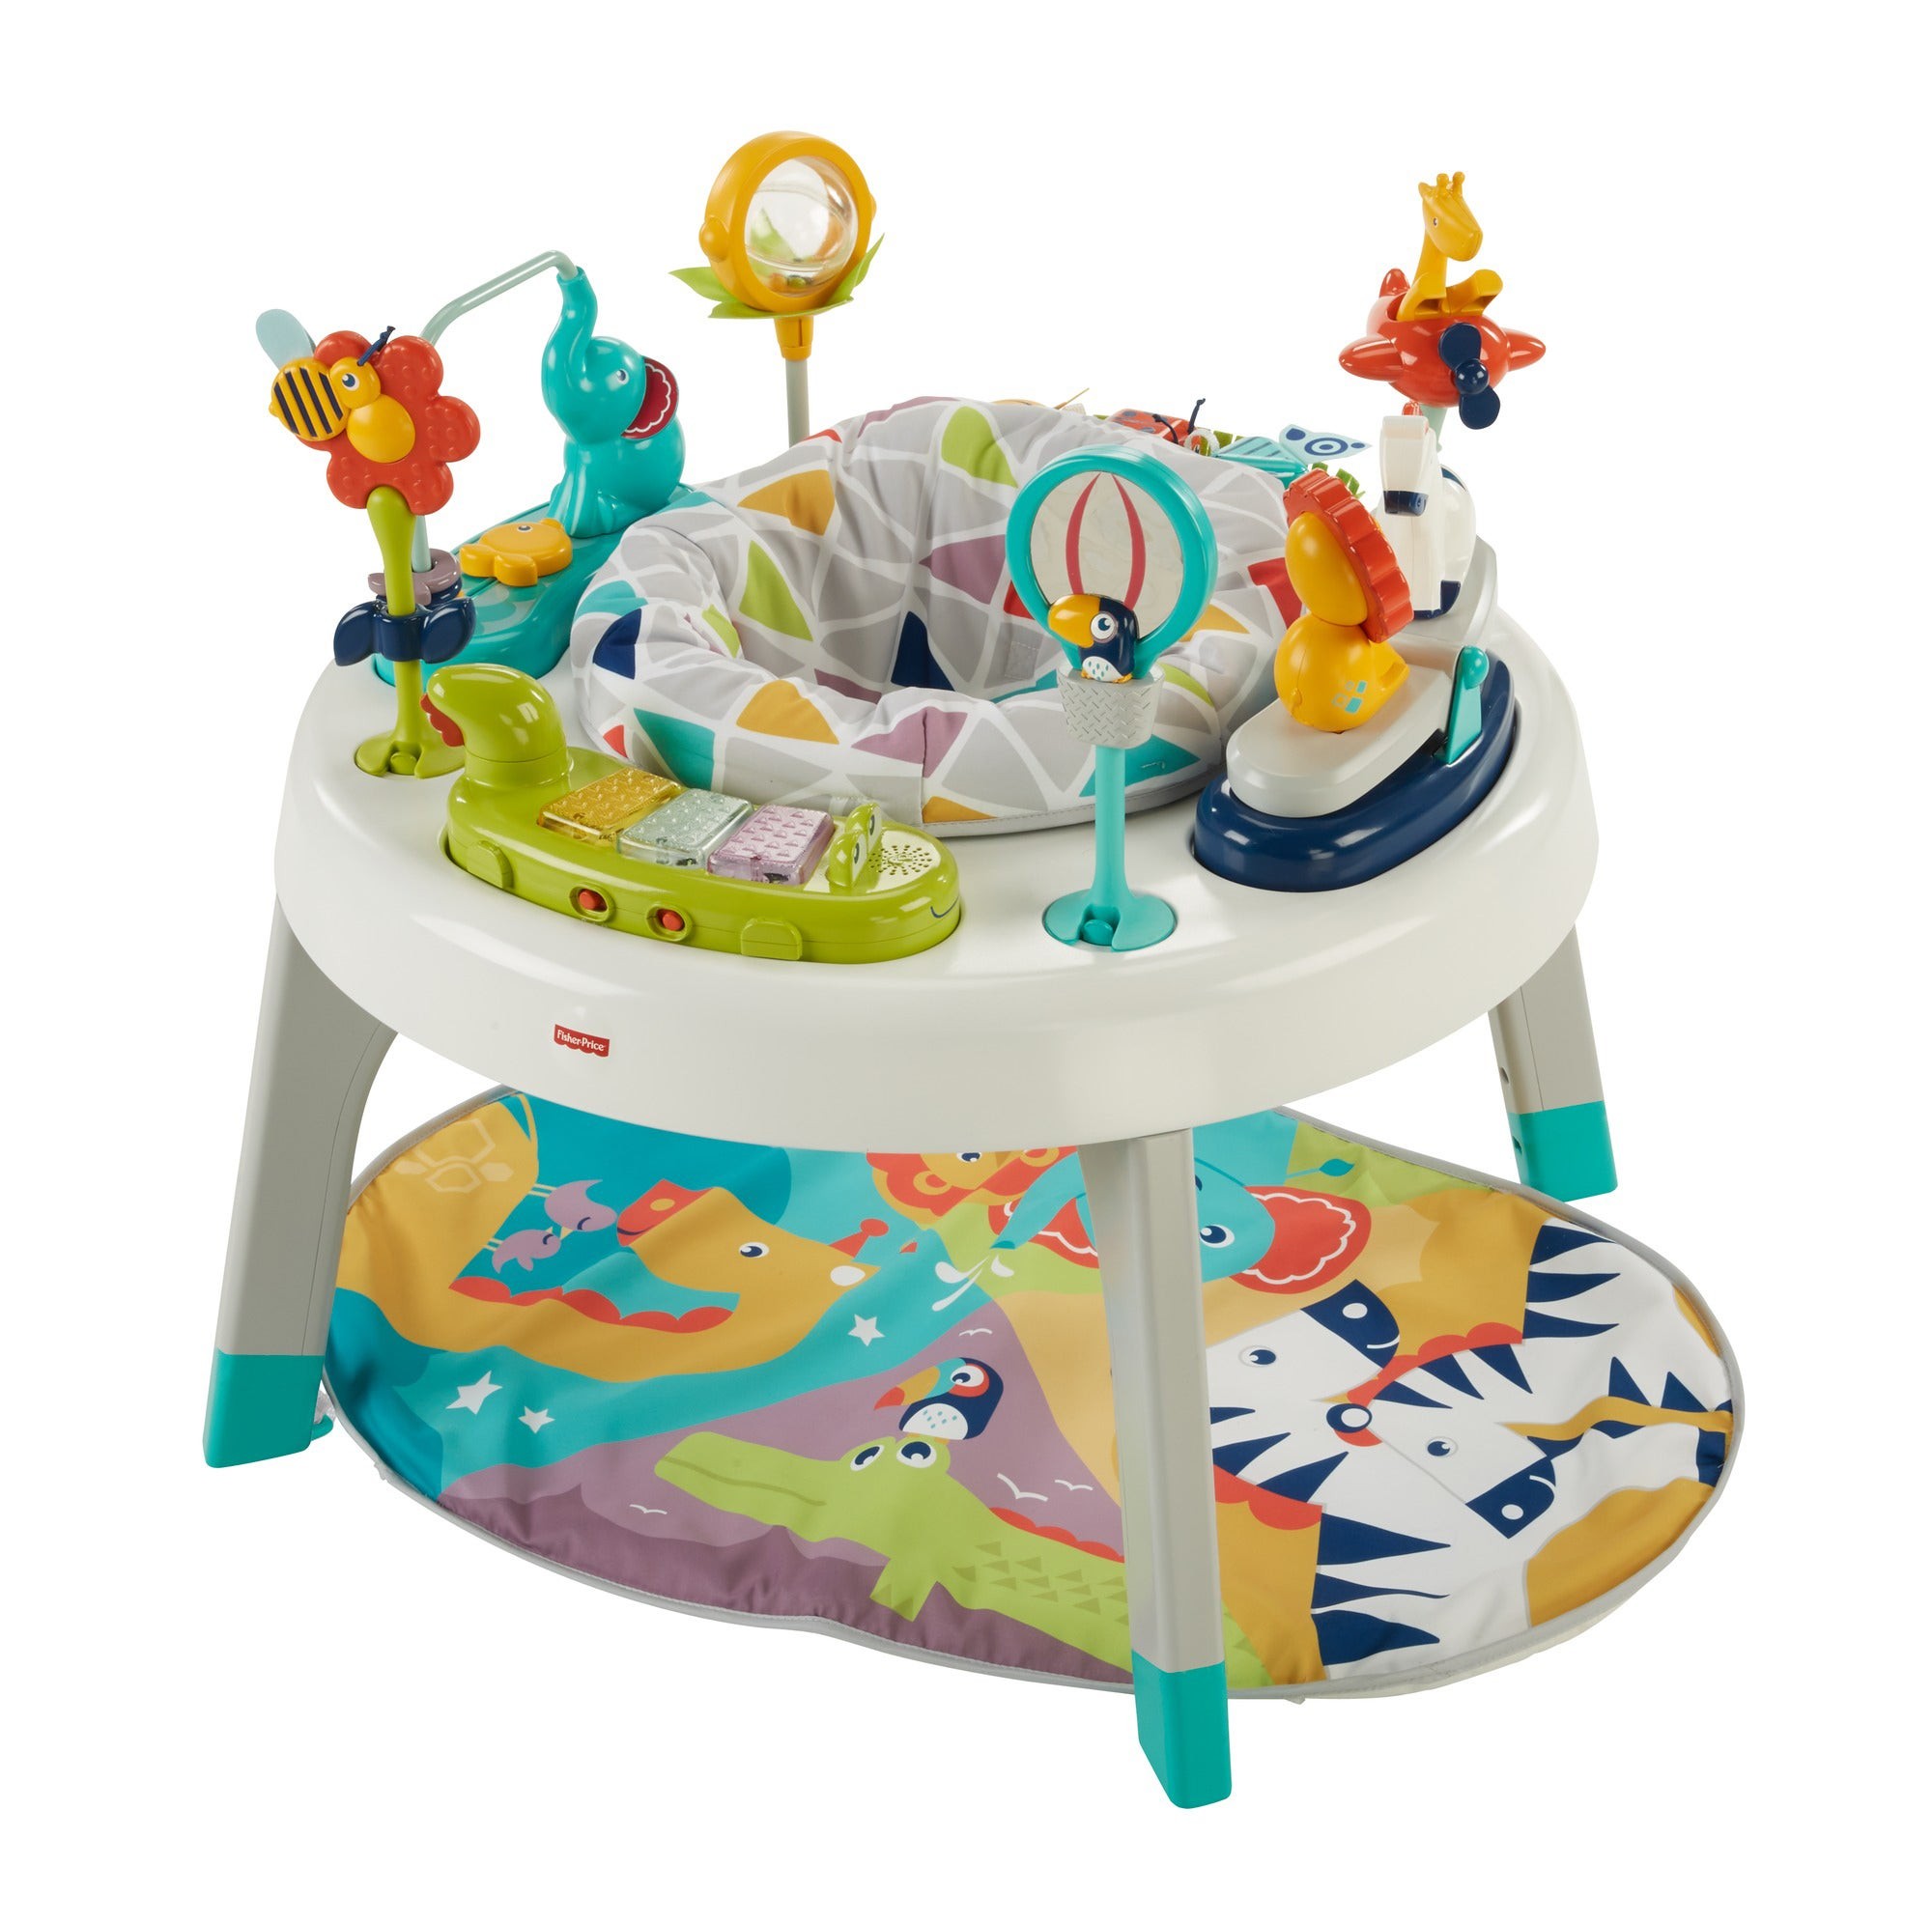 3-in-1 Sit-to-Stand Activity Center